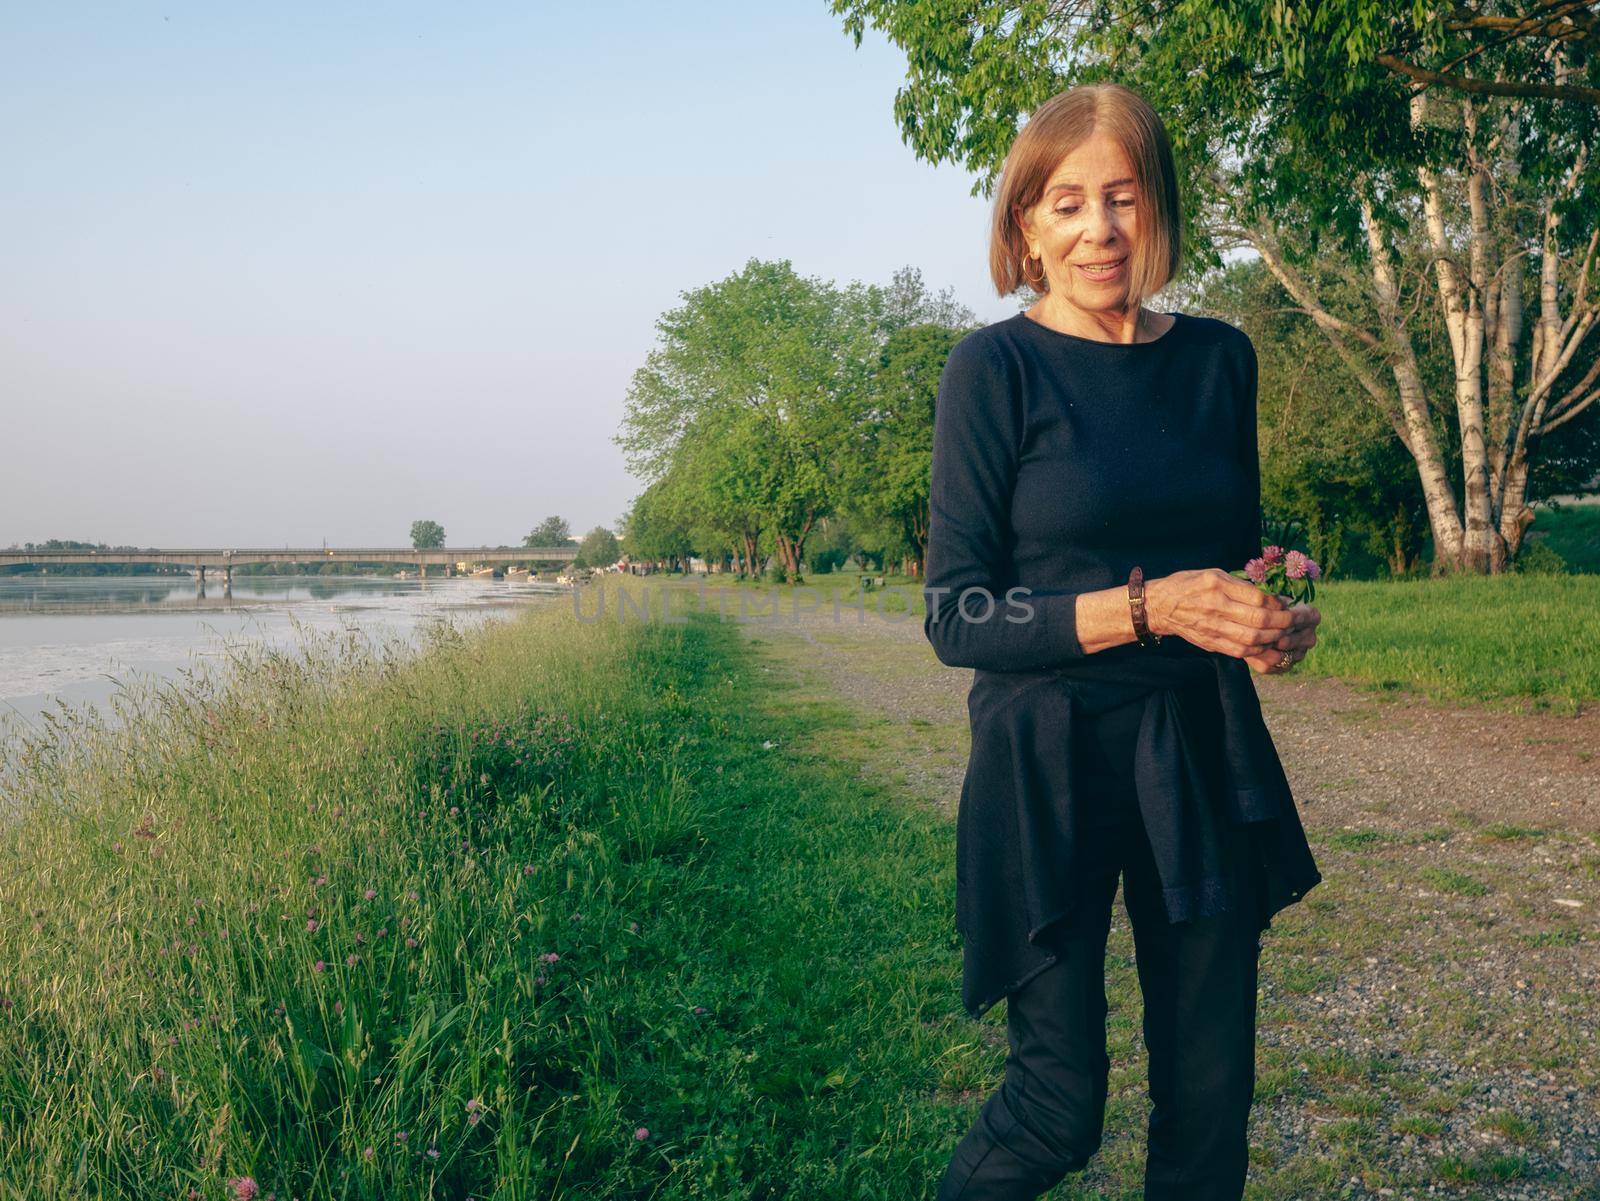 single female pensioner having fun in a park - aging free and wellness concept